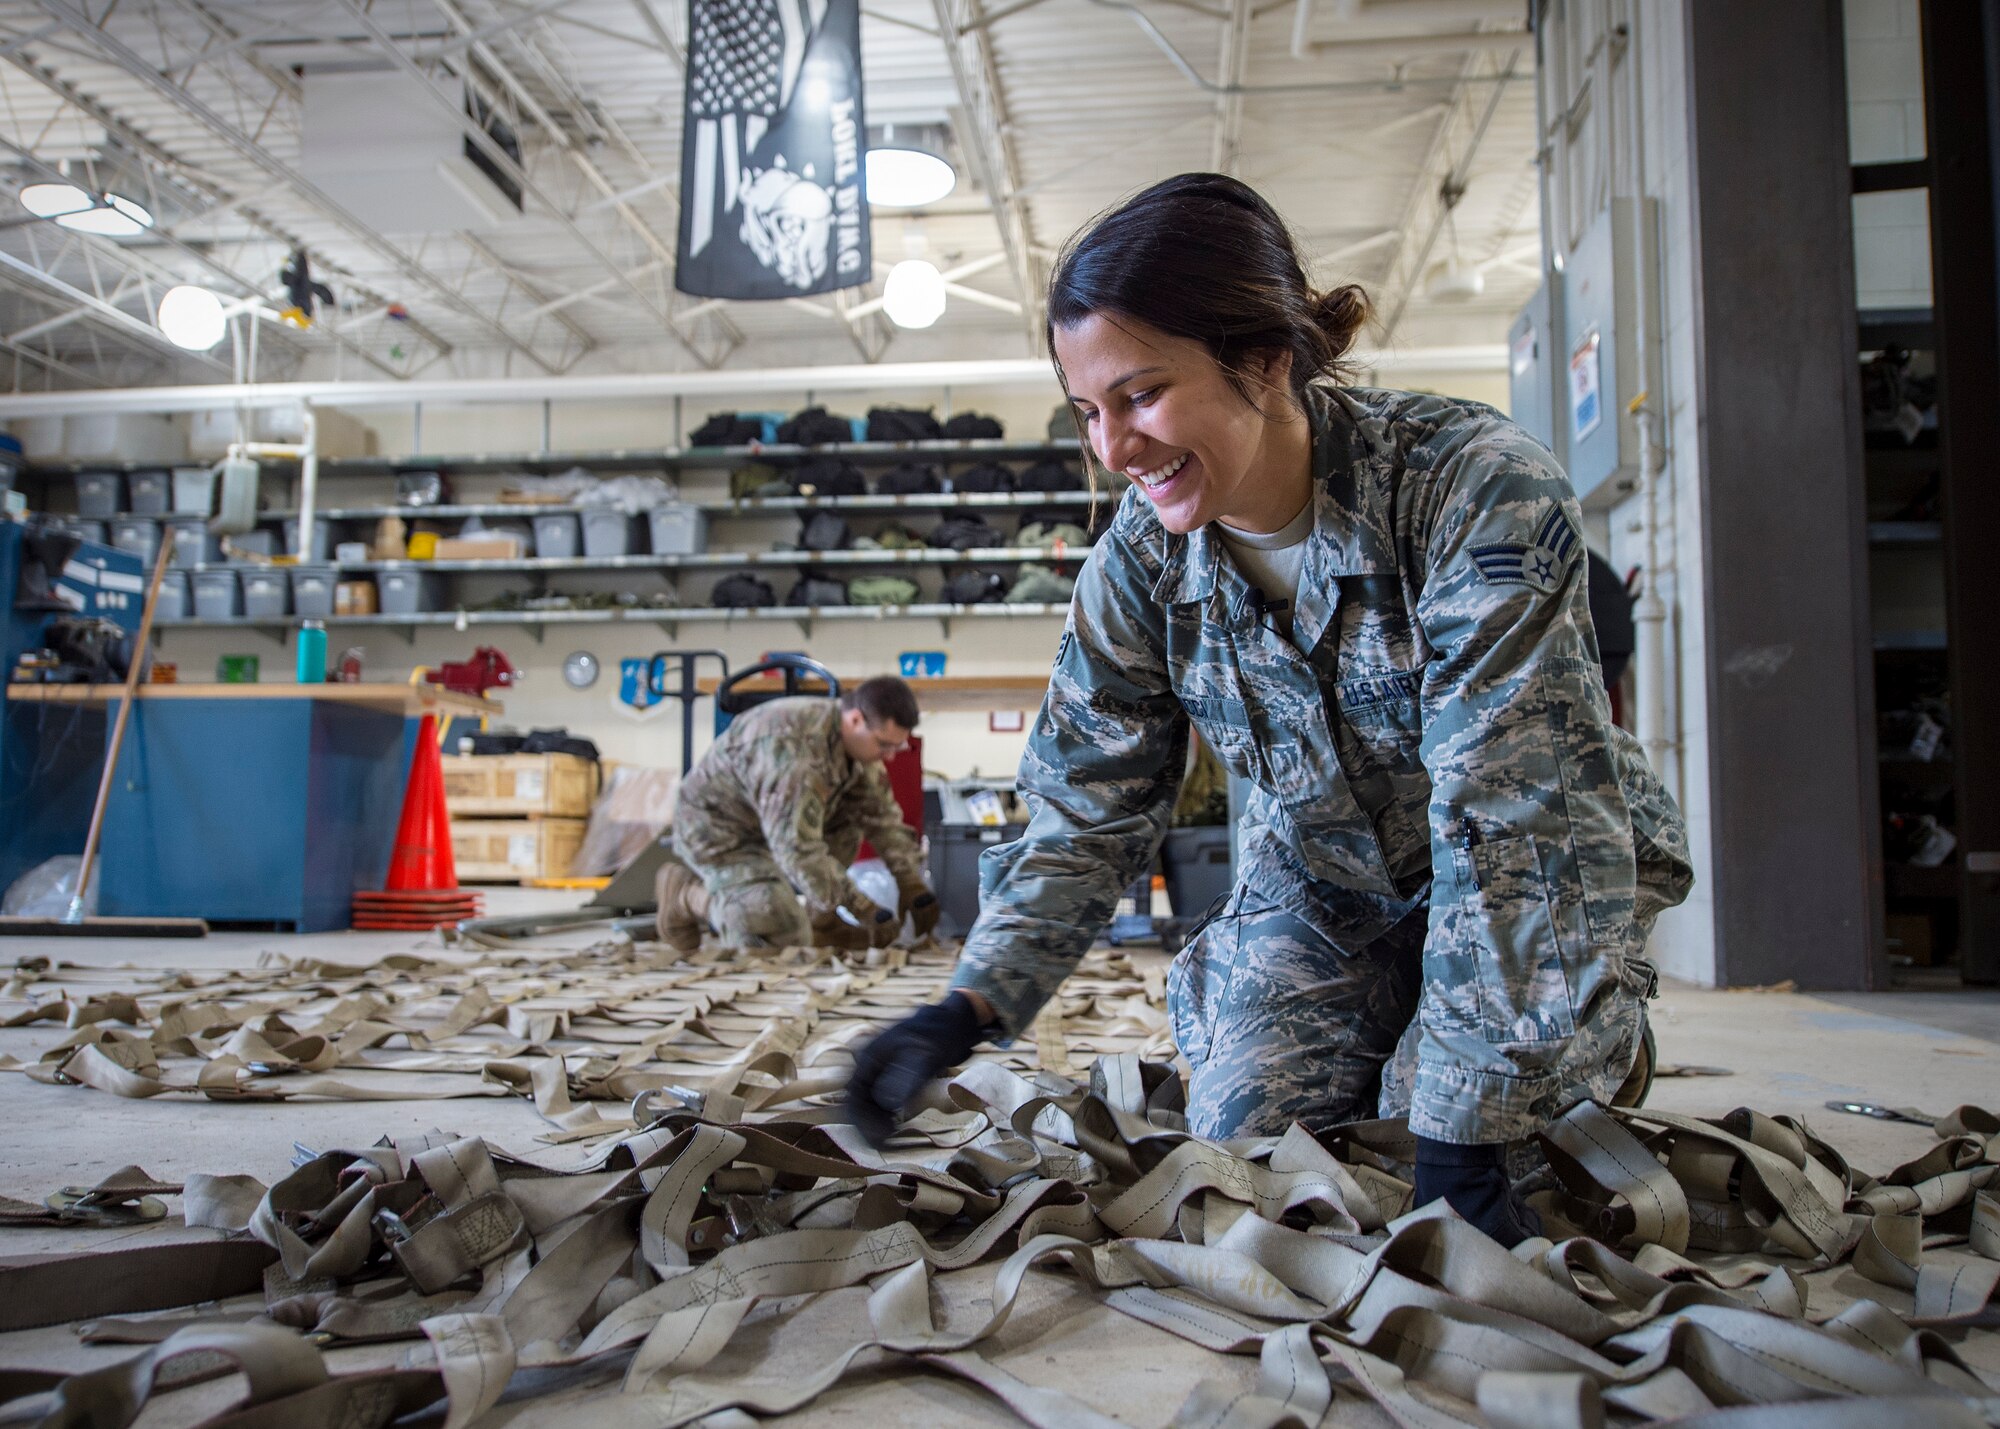 U.S. Air Force Senior Airman Marissa Ricci, from the 133rd Small Air Terminal, lays out cargo straps to secure palletized boxes of food in St. Paul, May 18, 2019.